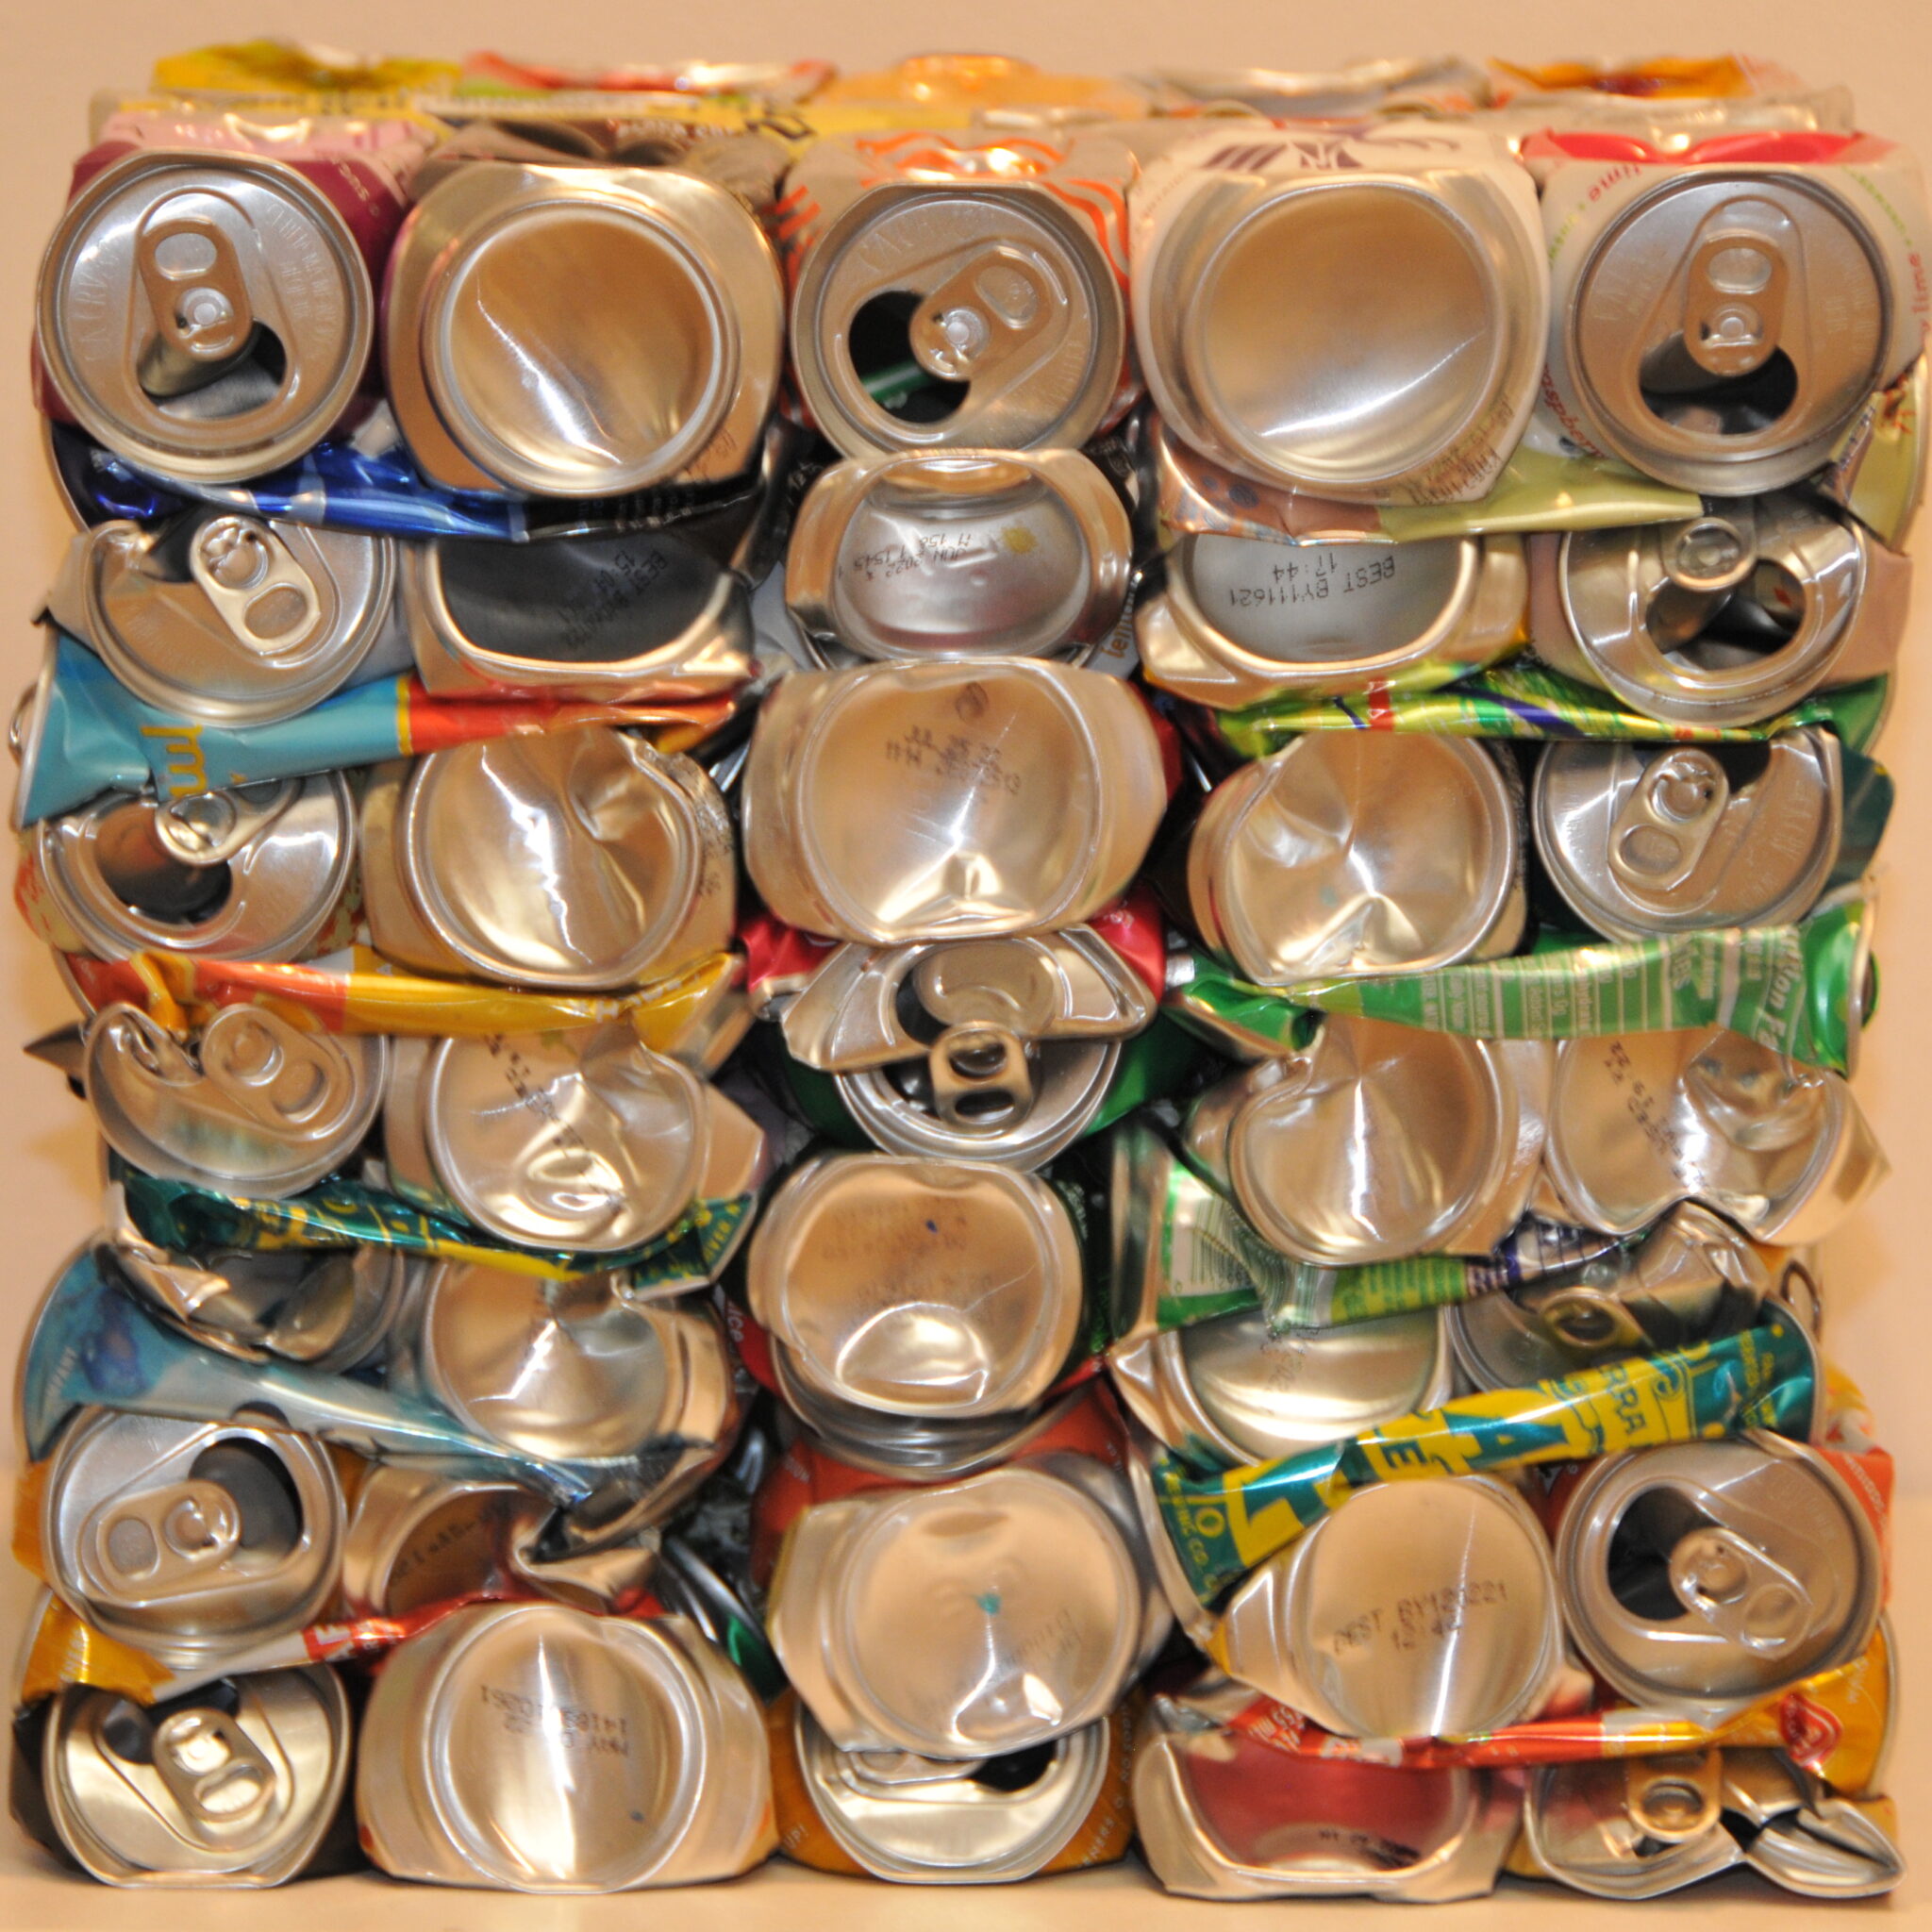 Who Says Aluminum Cans Don’t Make Great Art?